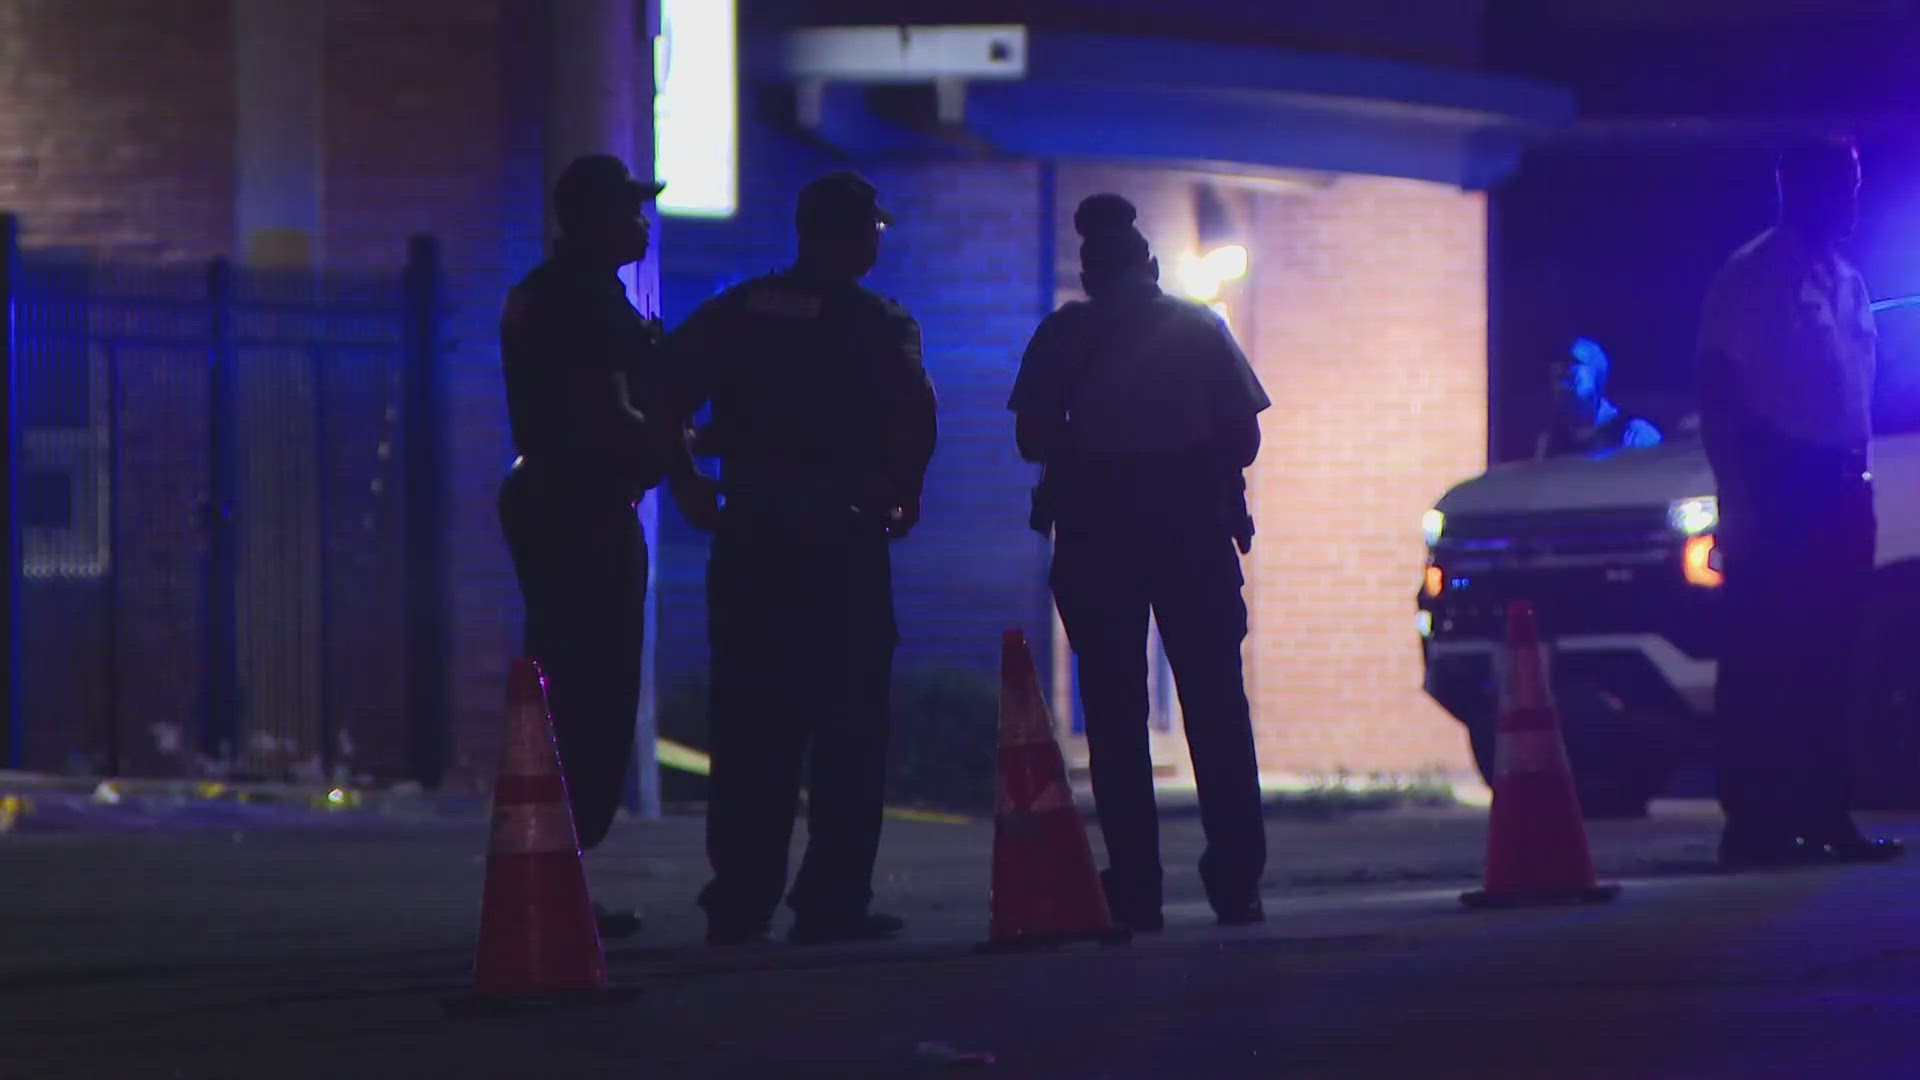 Police still looking for shooting suspect outside Soulard nightclub. It's a business some people call "a problem."